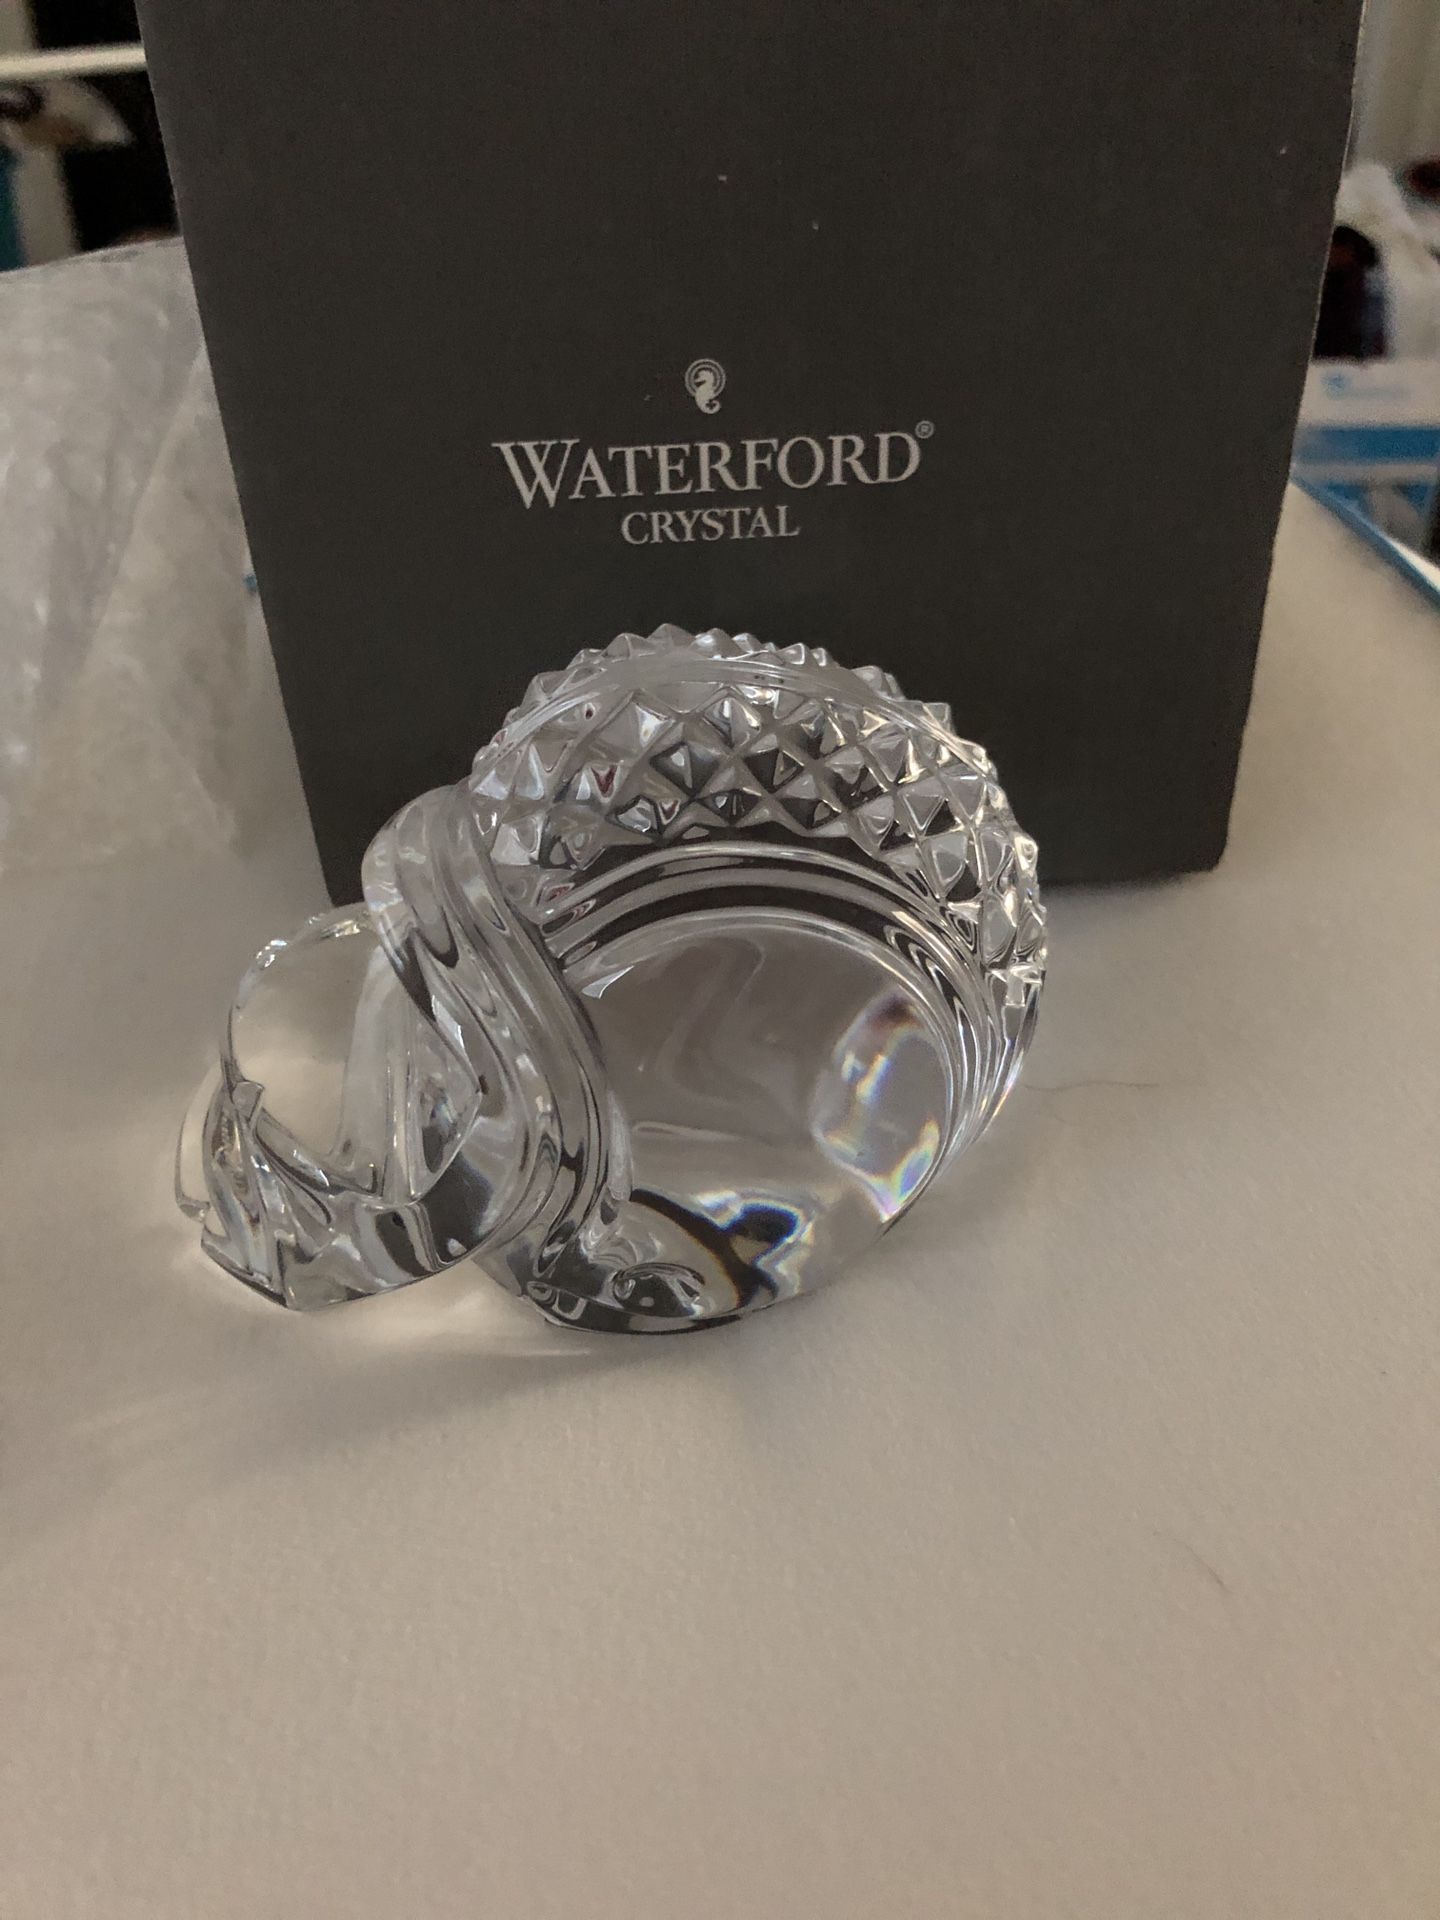 Waterford Crystal Football Helmet Paperweight - new with box